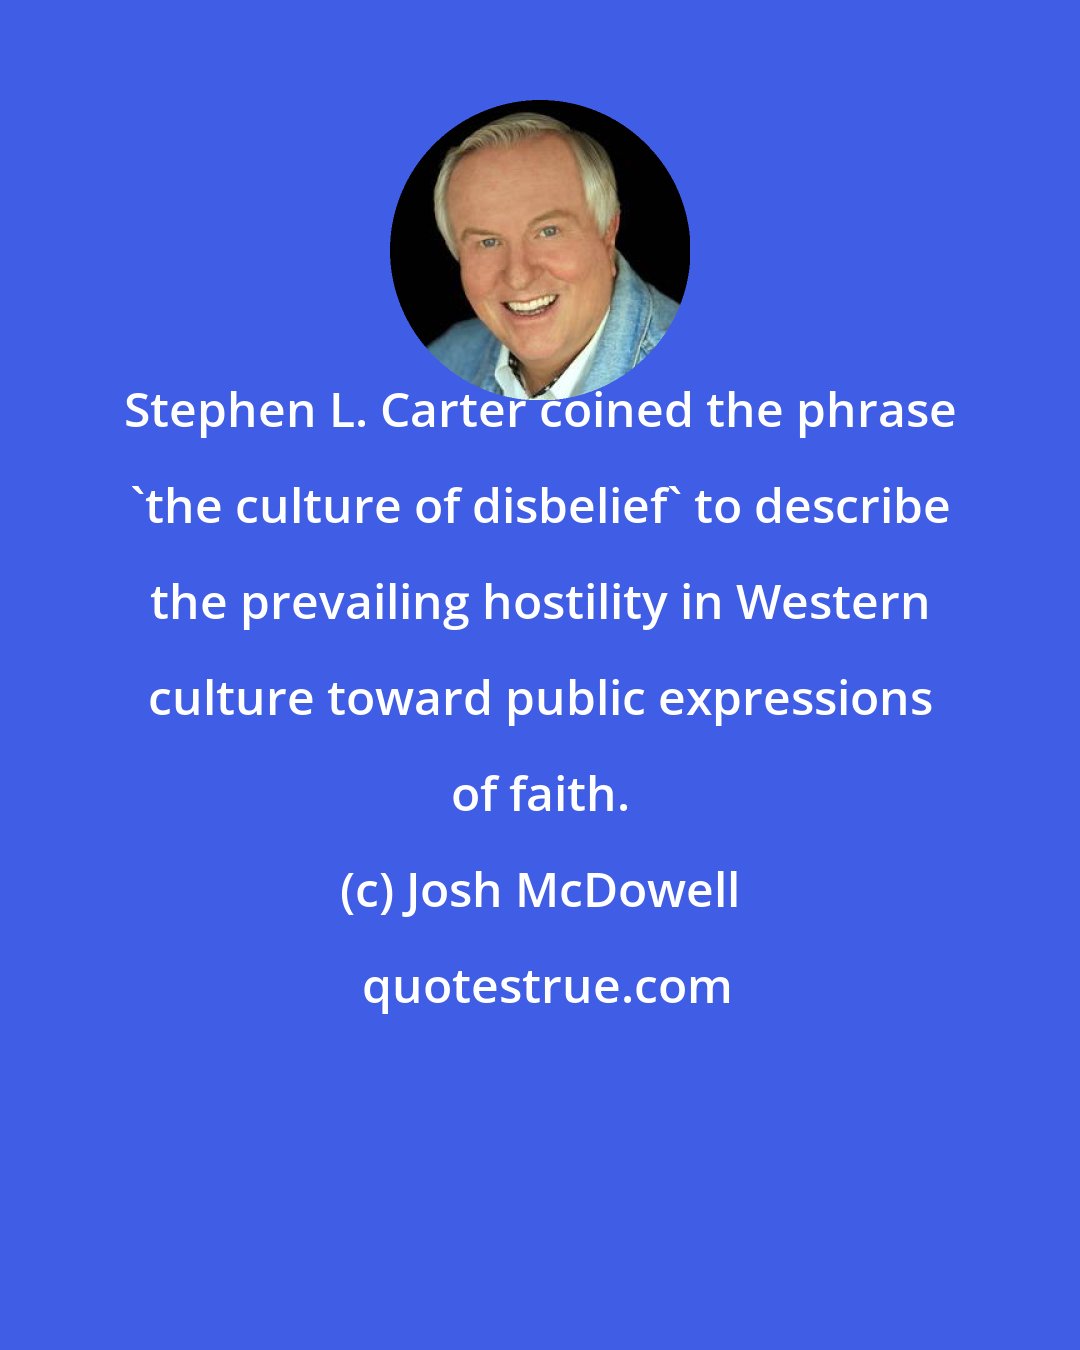 Josh McDowell: Stephen L. Carter coined the phrase 'the culture of disbelief' to describe the prevailing hostility in Western culture toward public expressions of faith.